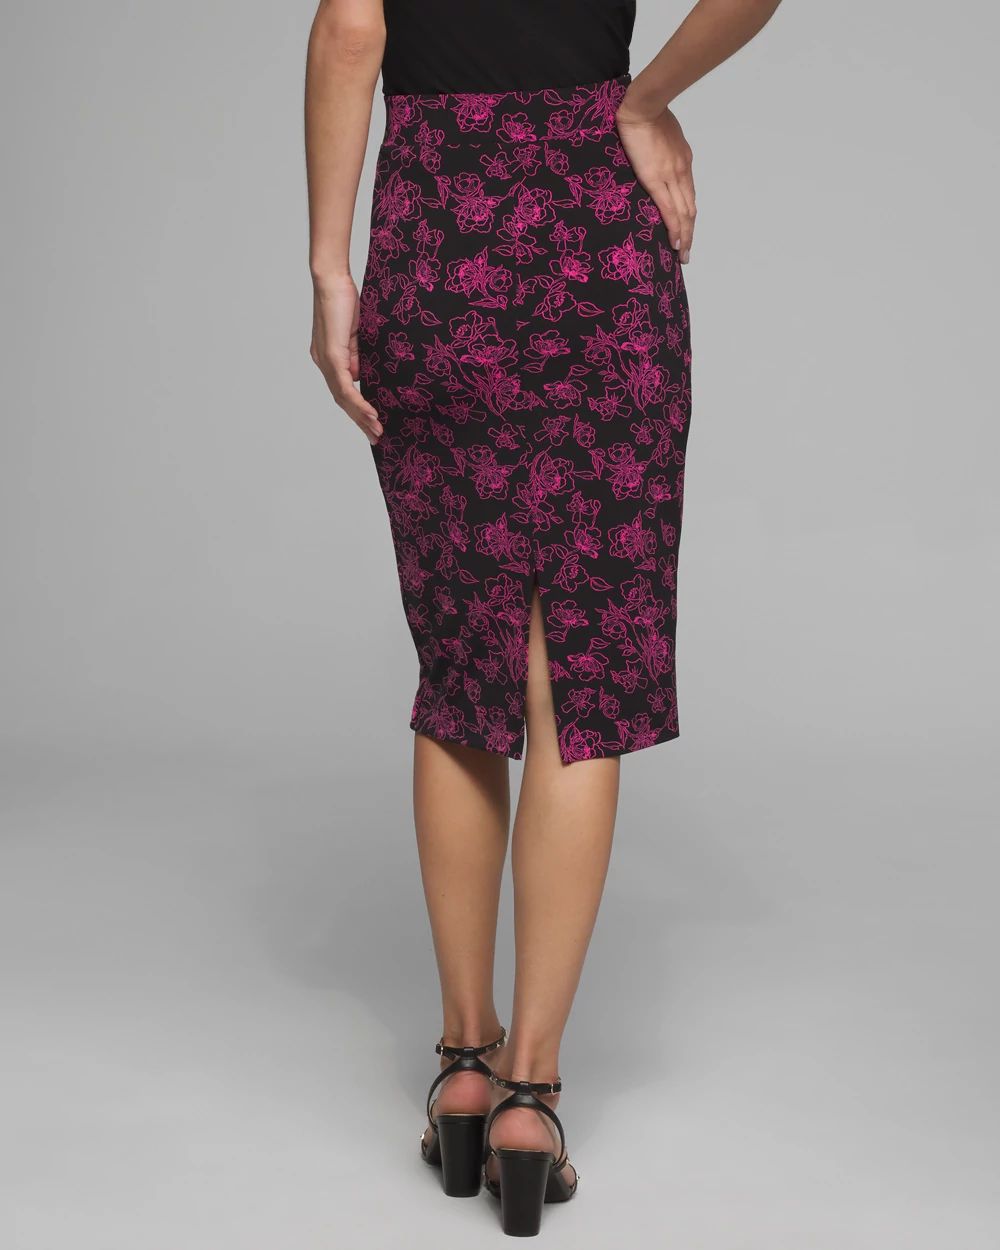 Outlet WHBM Pencil Skirt click to view larger image.